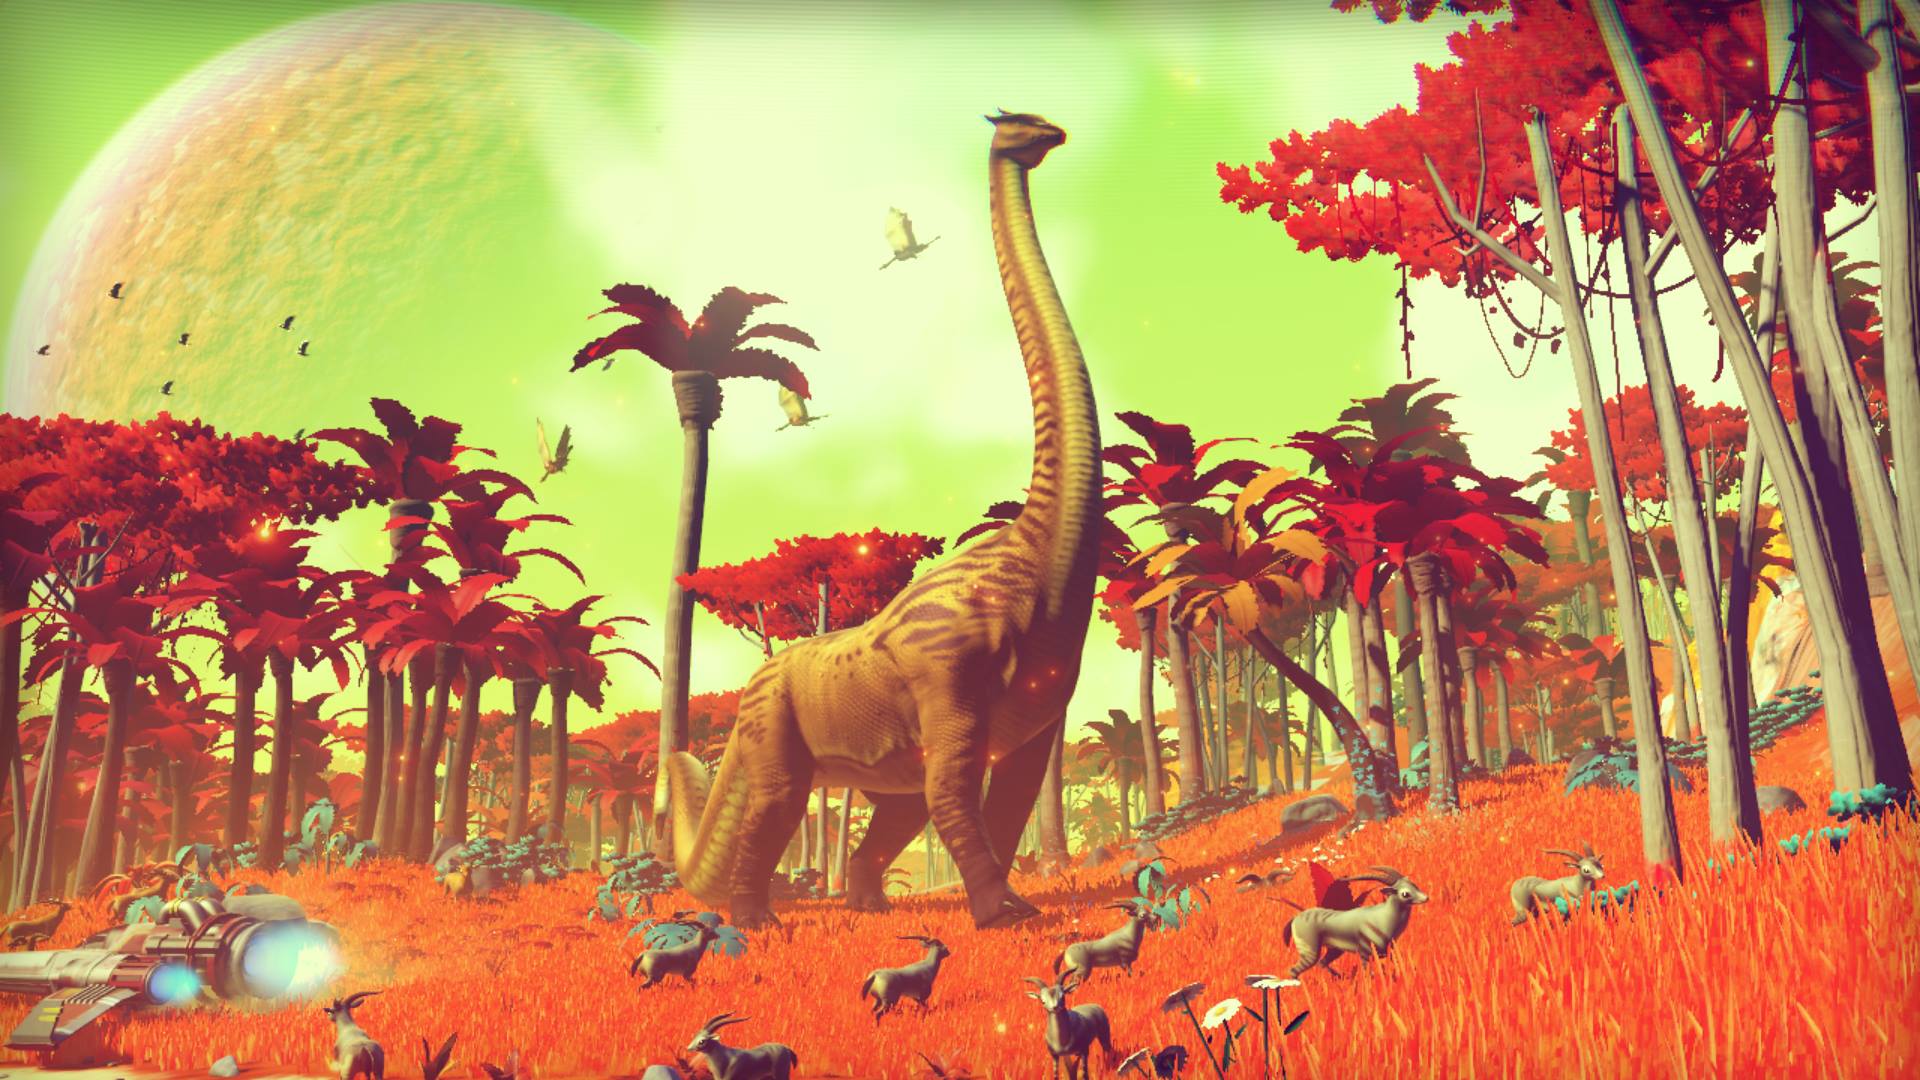 nms01